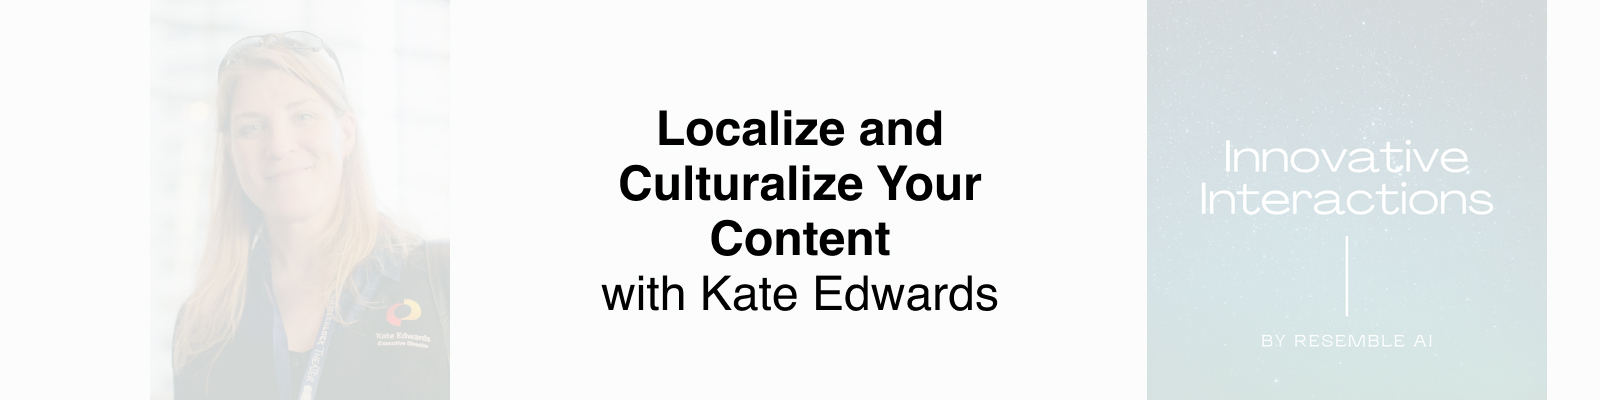 Localize and Culturalize games with Kate Edwards.